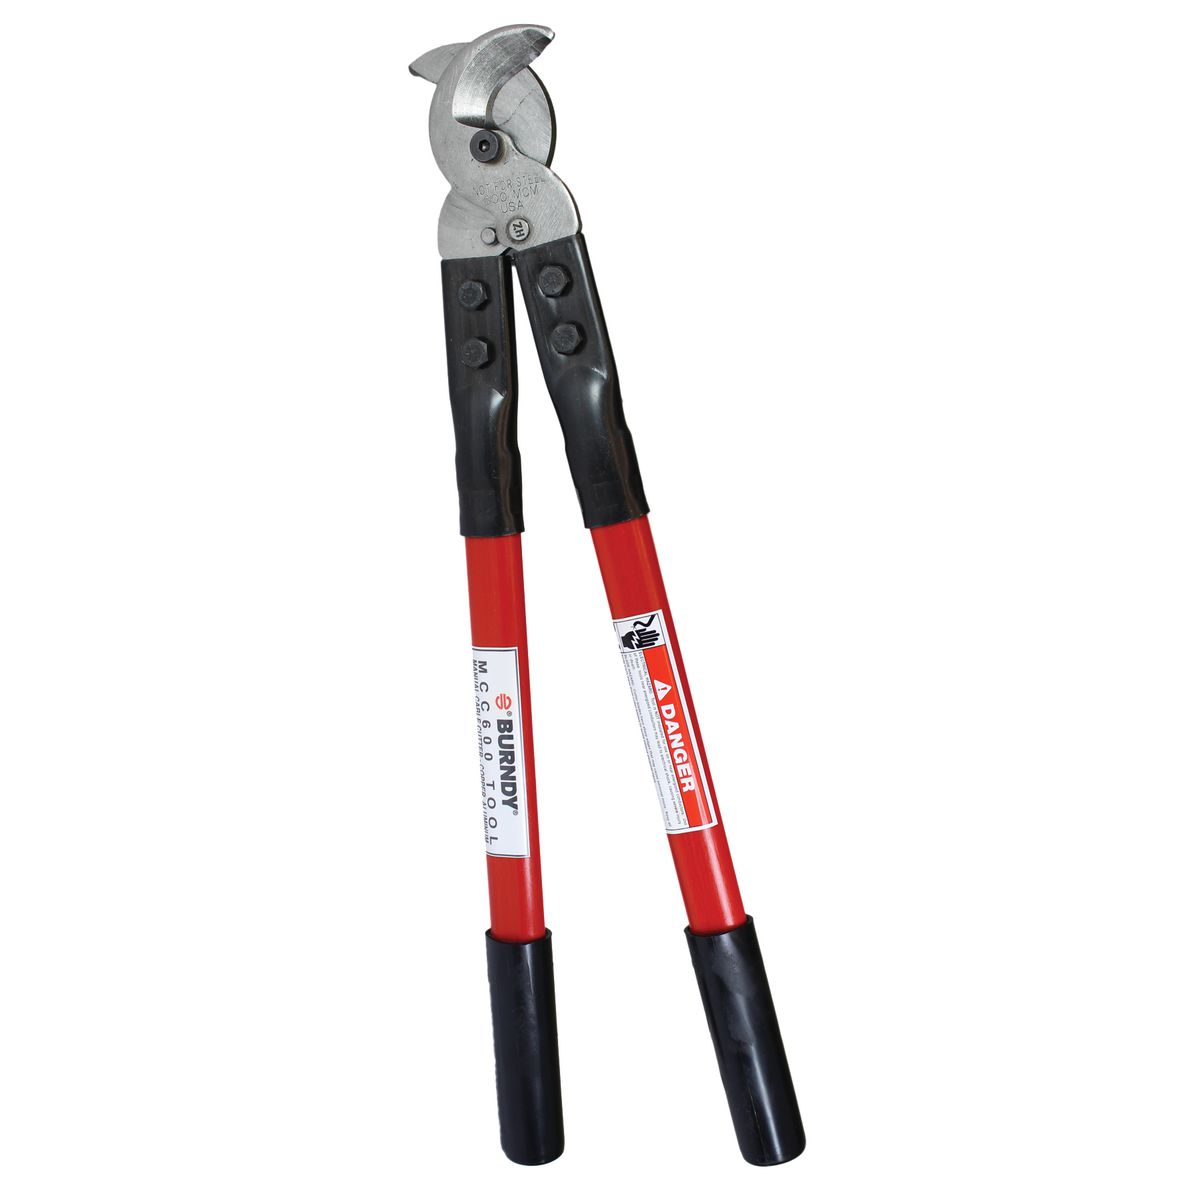 MANUAL CABLE CUTTER